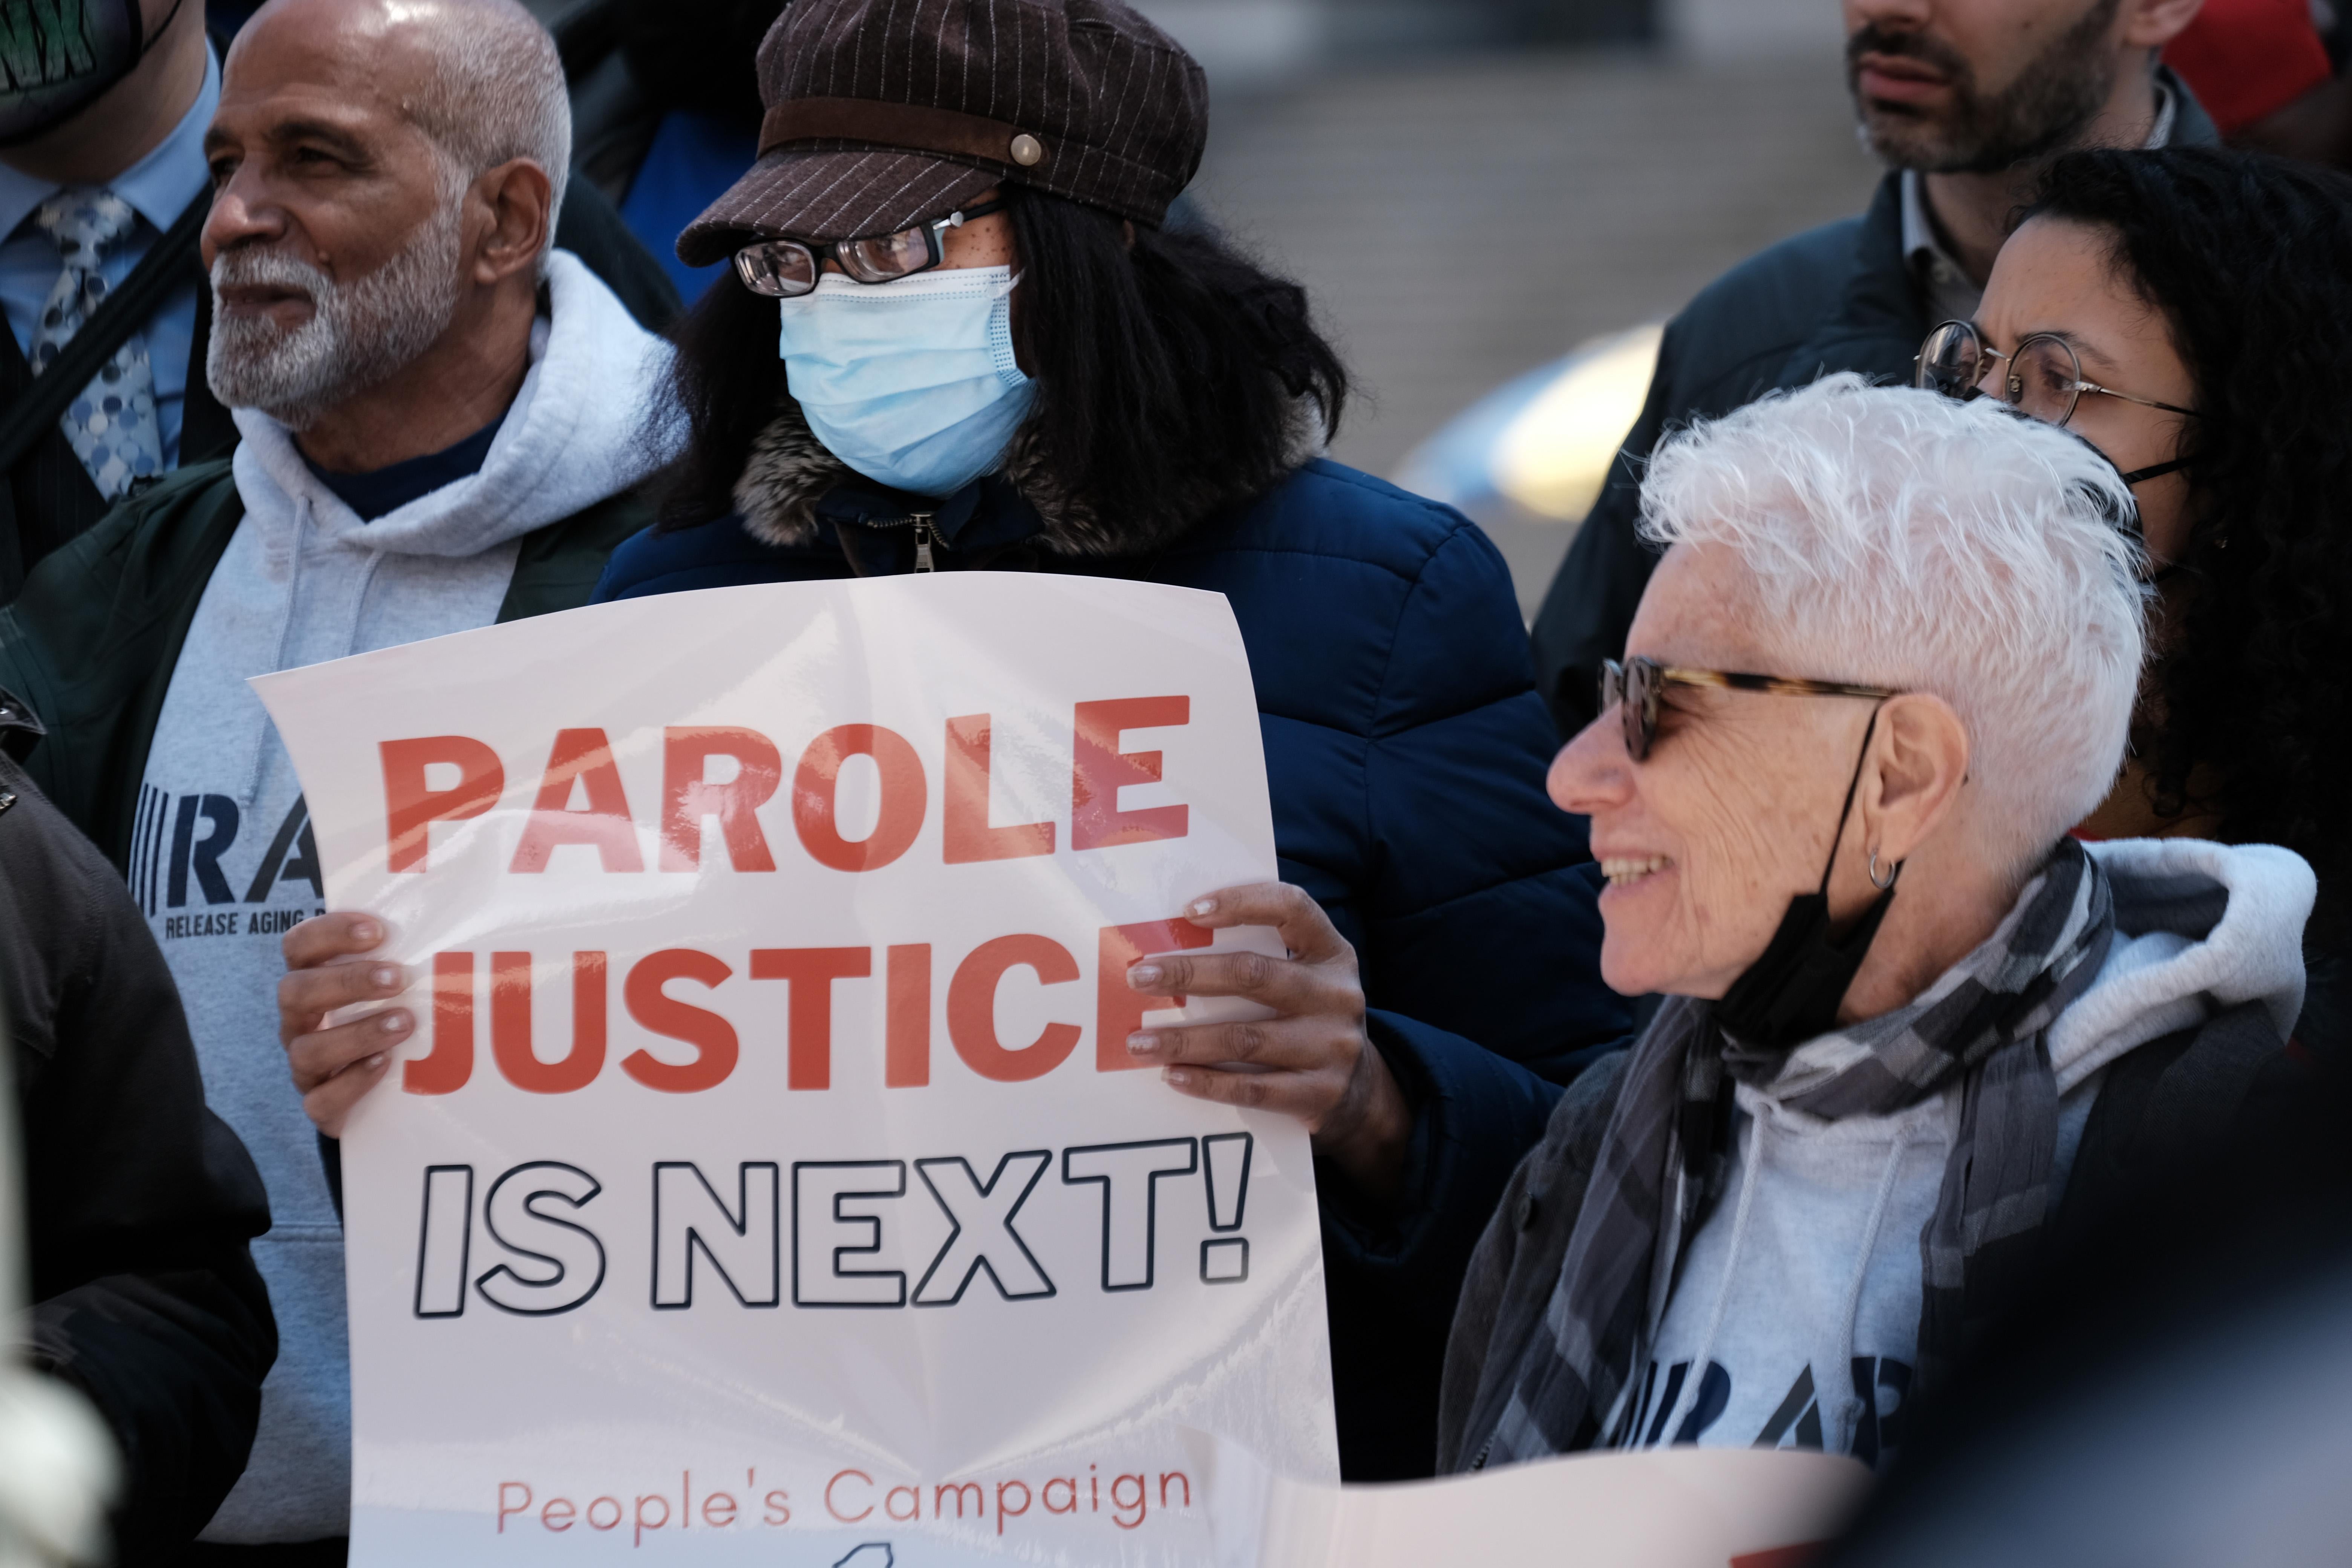 A woman holds a sign that says "PAROLE JUSTICE IS NEXT."